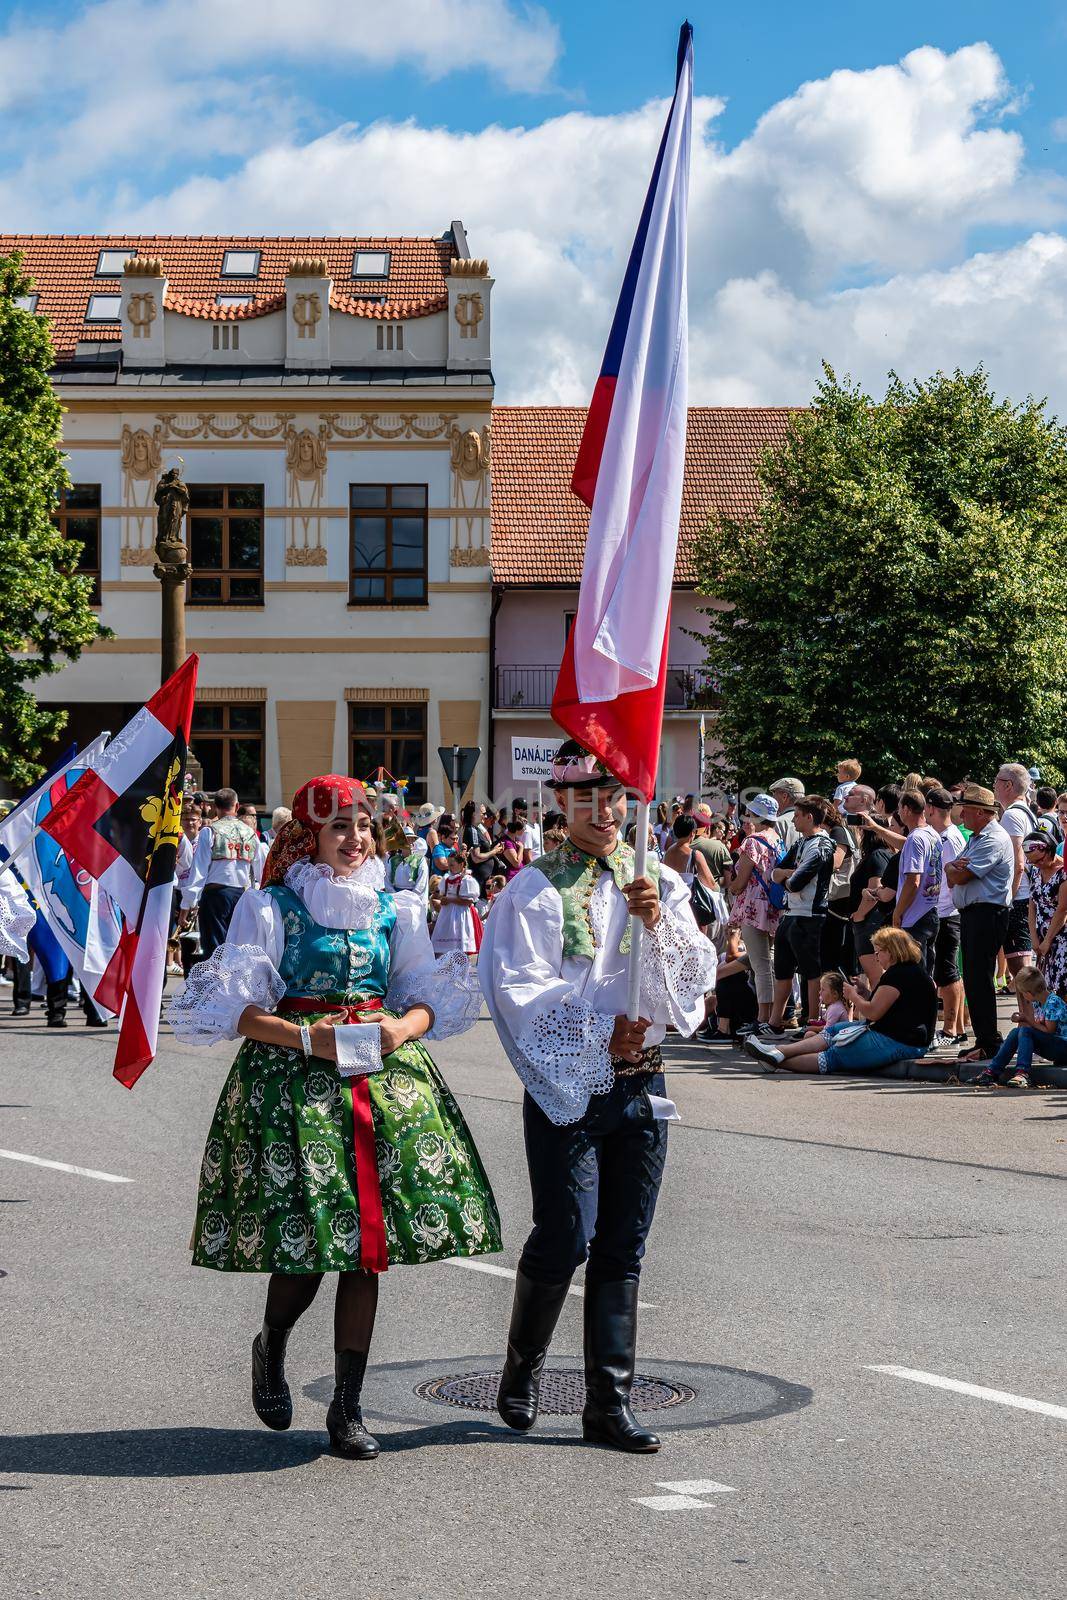 A boy and a girl carry the Czech flag in a procession by rostik924